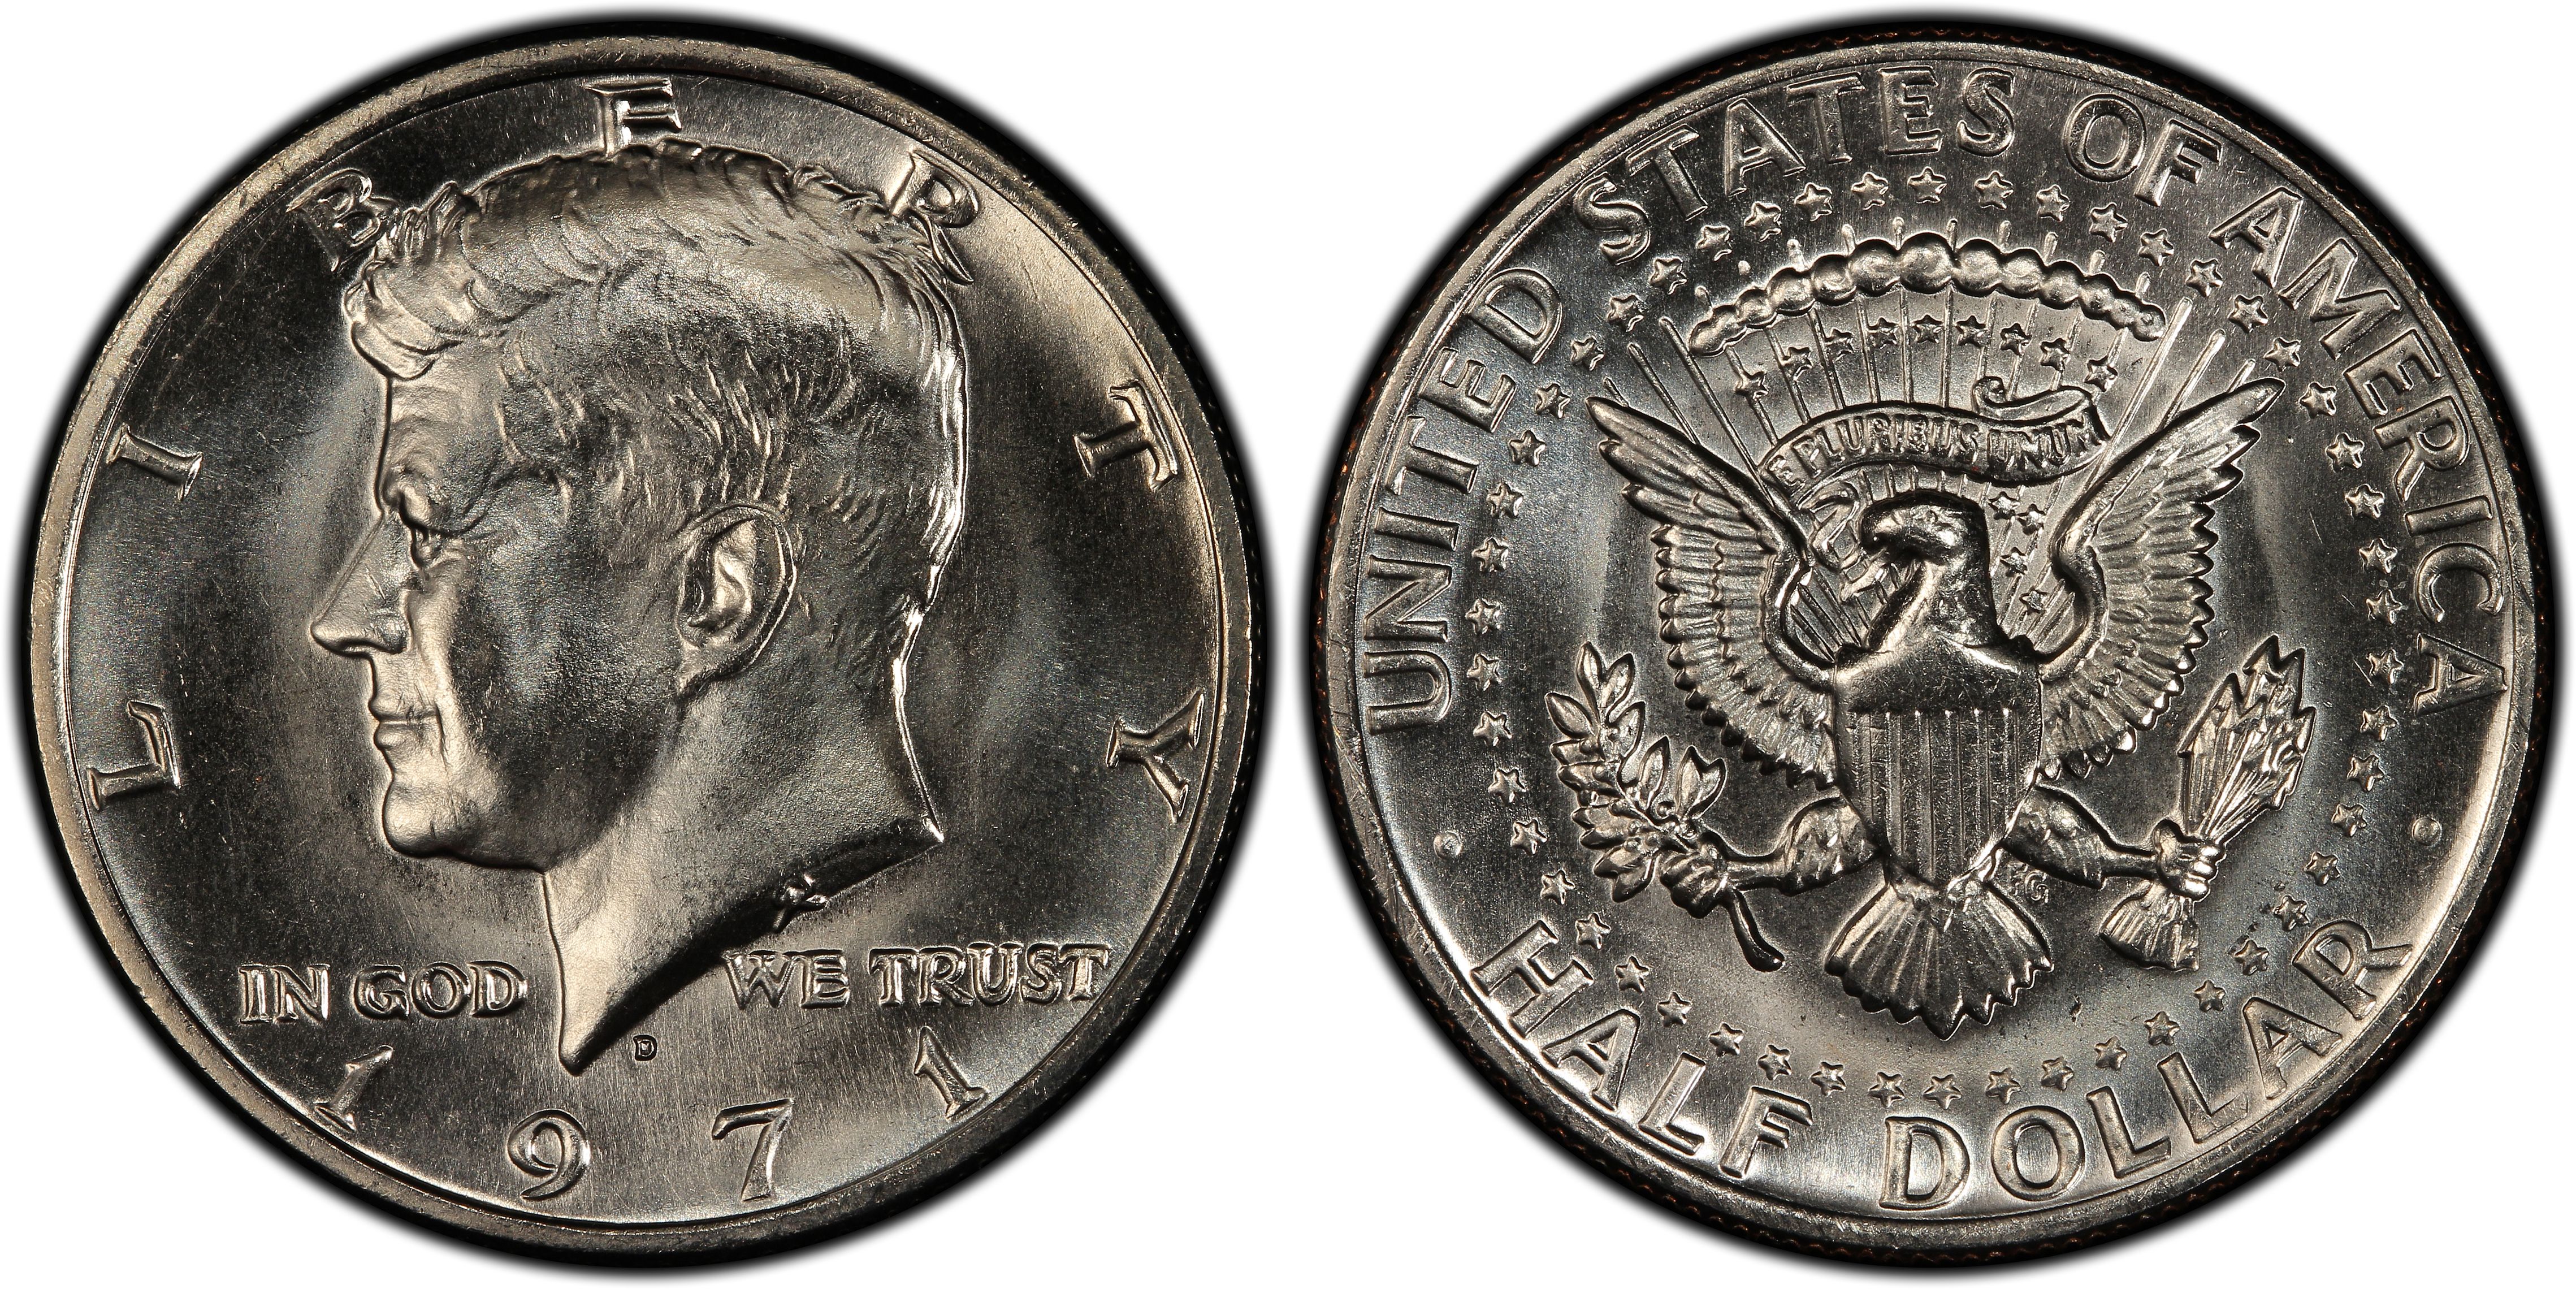 1971 D 50c Ddo Fs 101 Regular Strike Kennedy Half Dollar Pcgs Coinfacts,Sauteed Mushrooms And Spinach